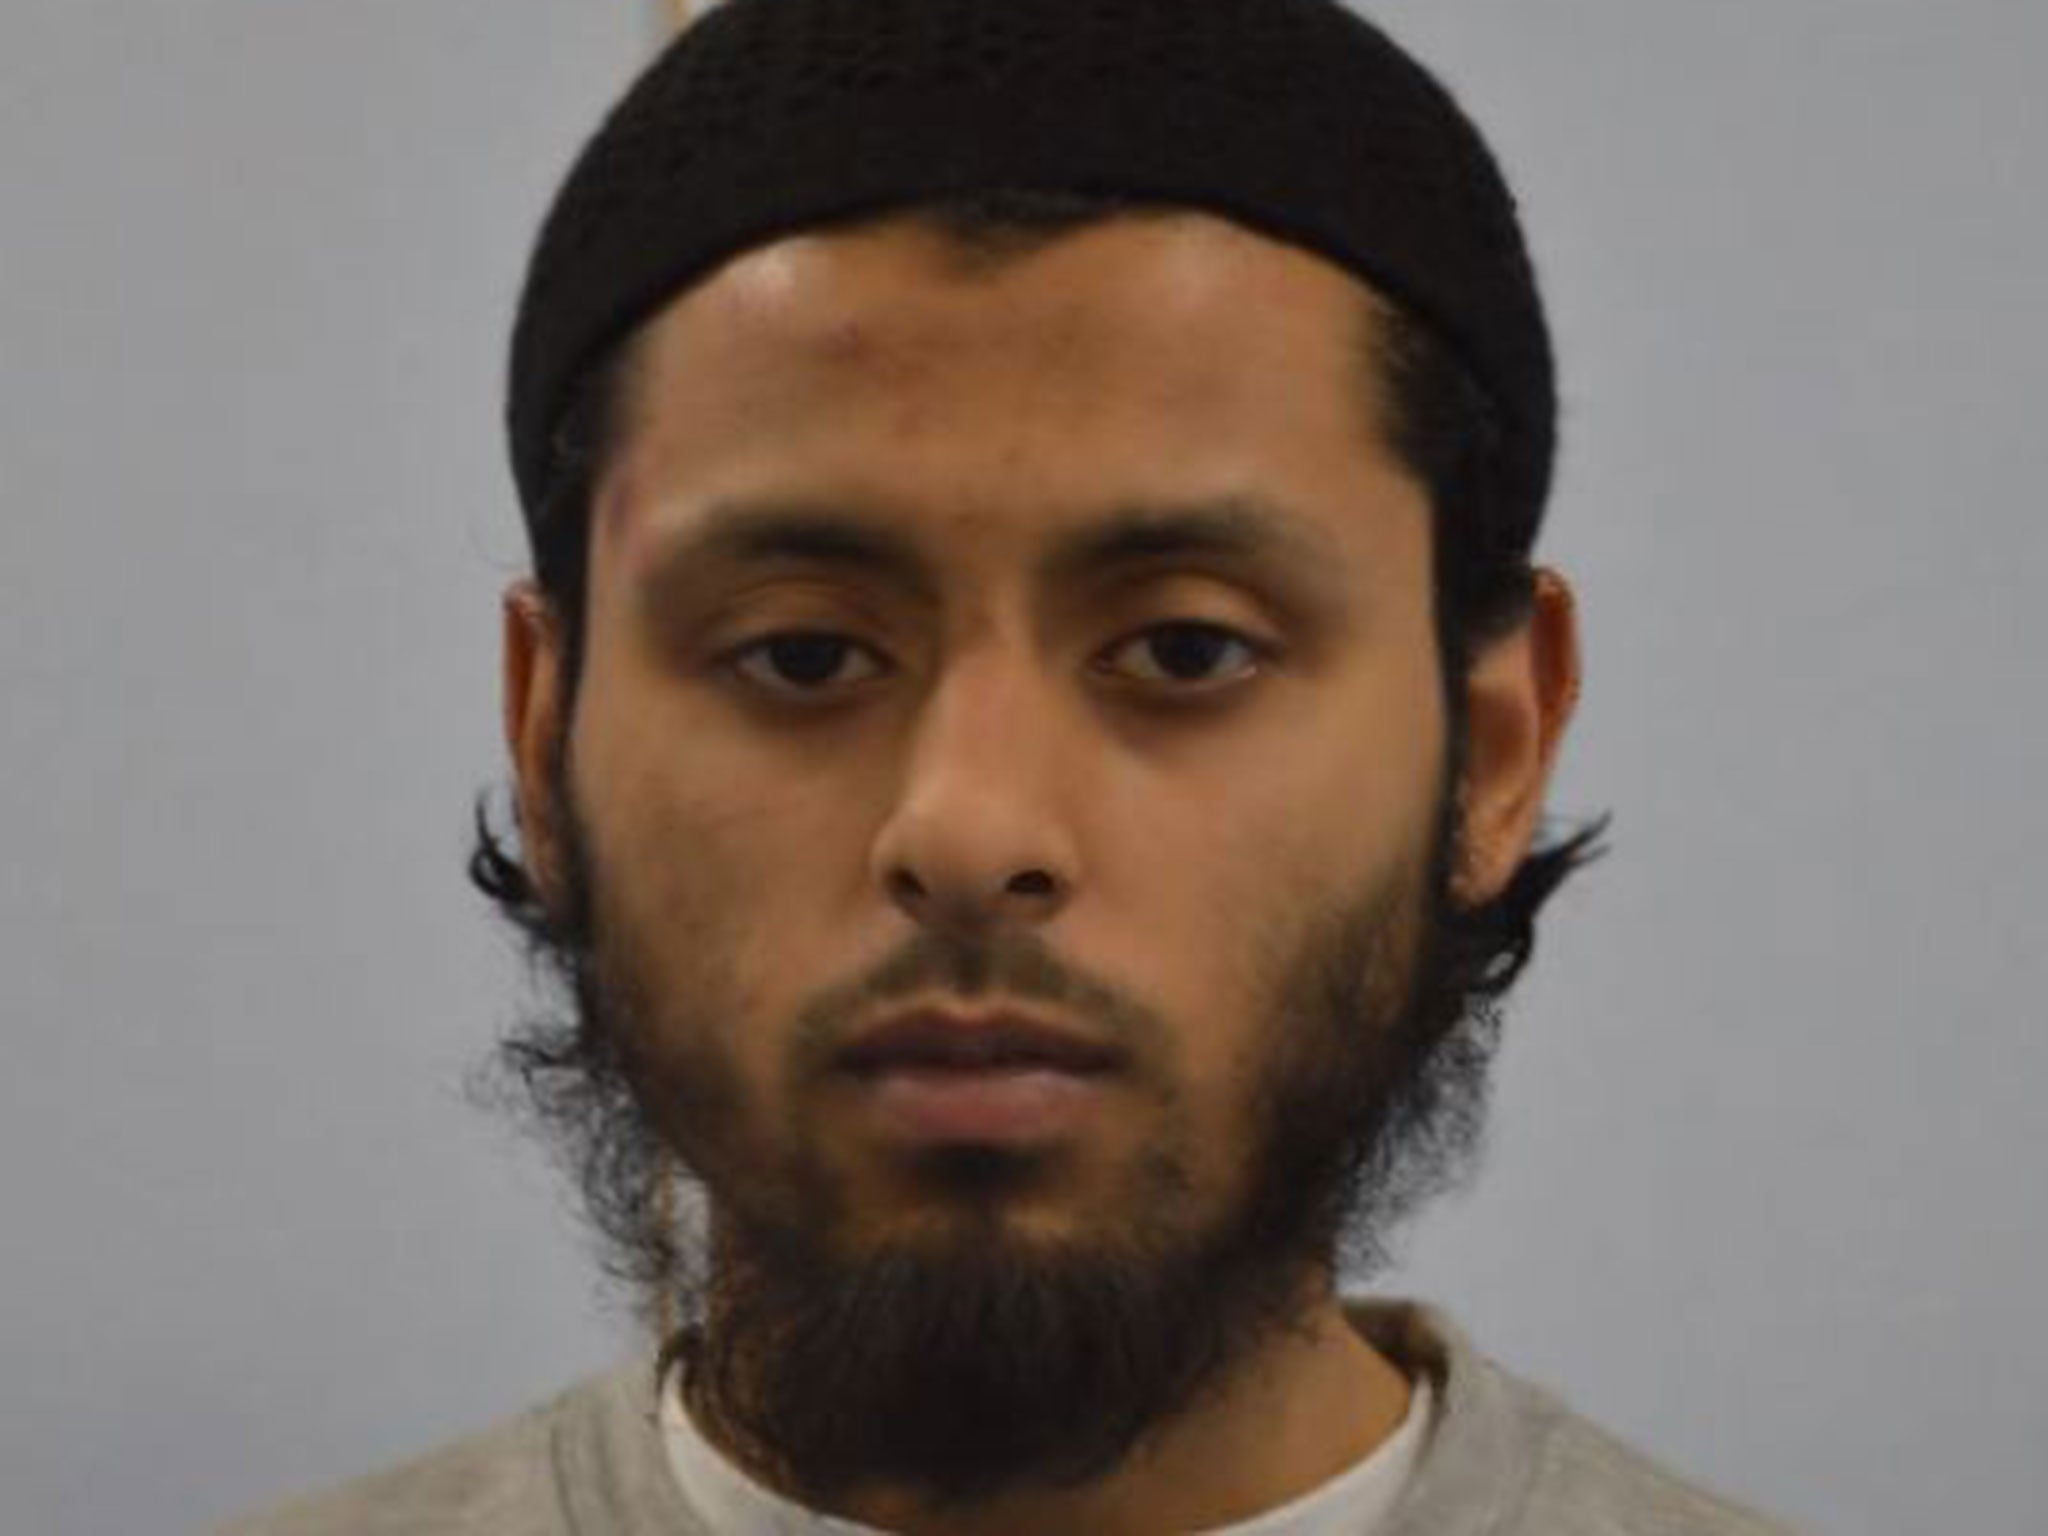 Umar Haque was jailed for life after trying to radicalise children